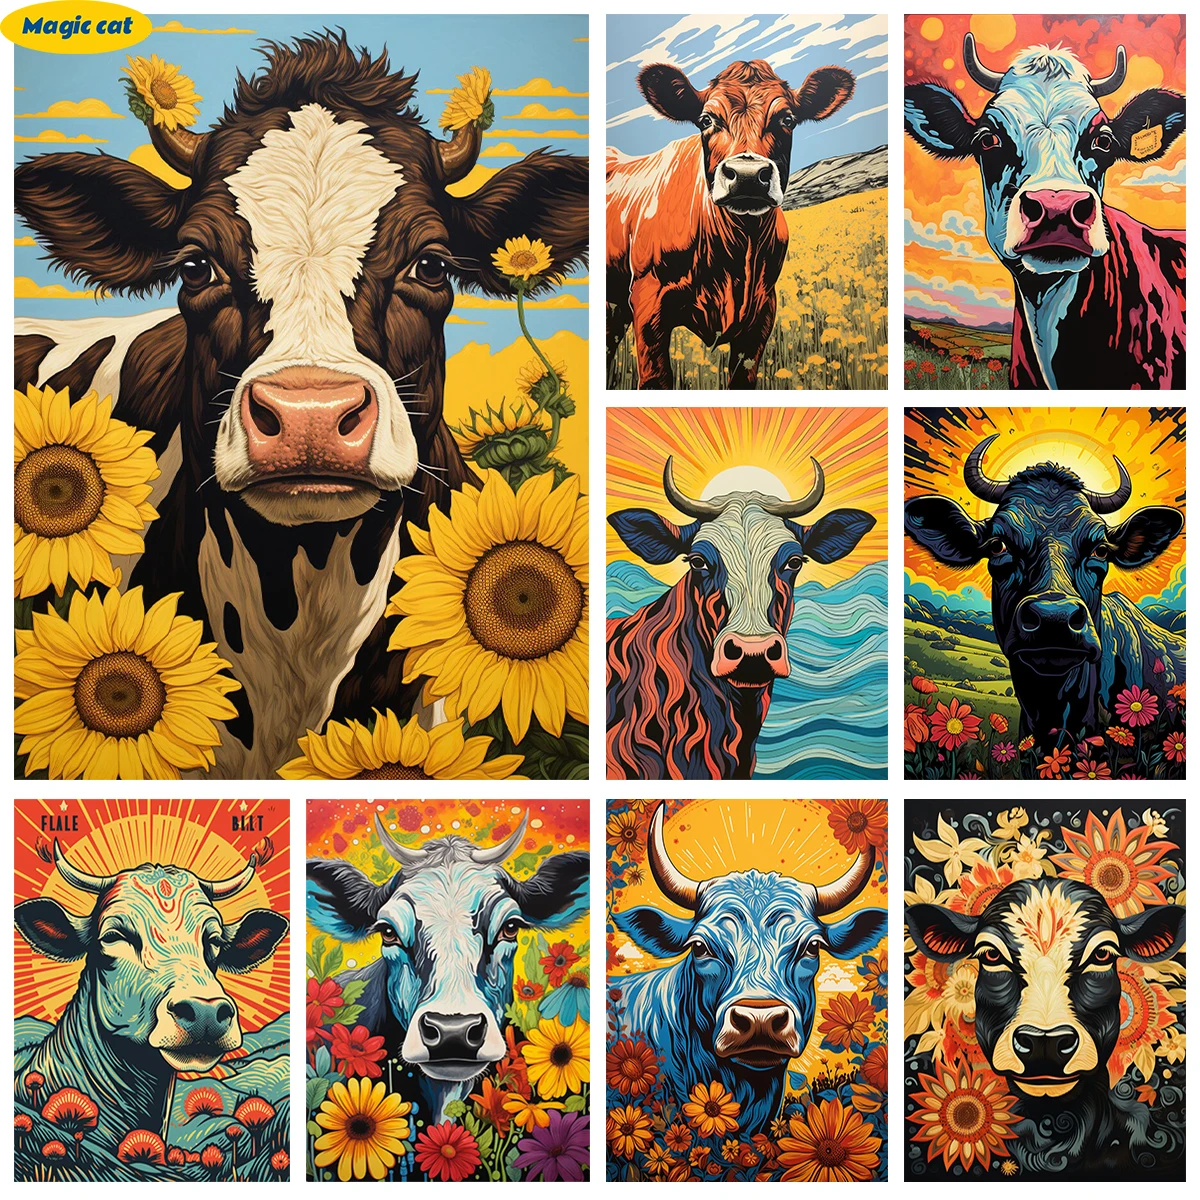 

Dairy Cow 5D Diamond Painting Grassland Cow And Flowers Full Square/Round Diamond Embroidery Cross Stitch Mosaic Hand Home Decor